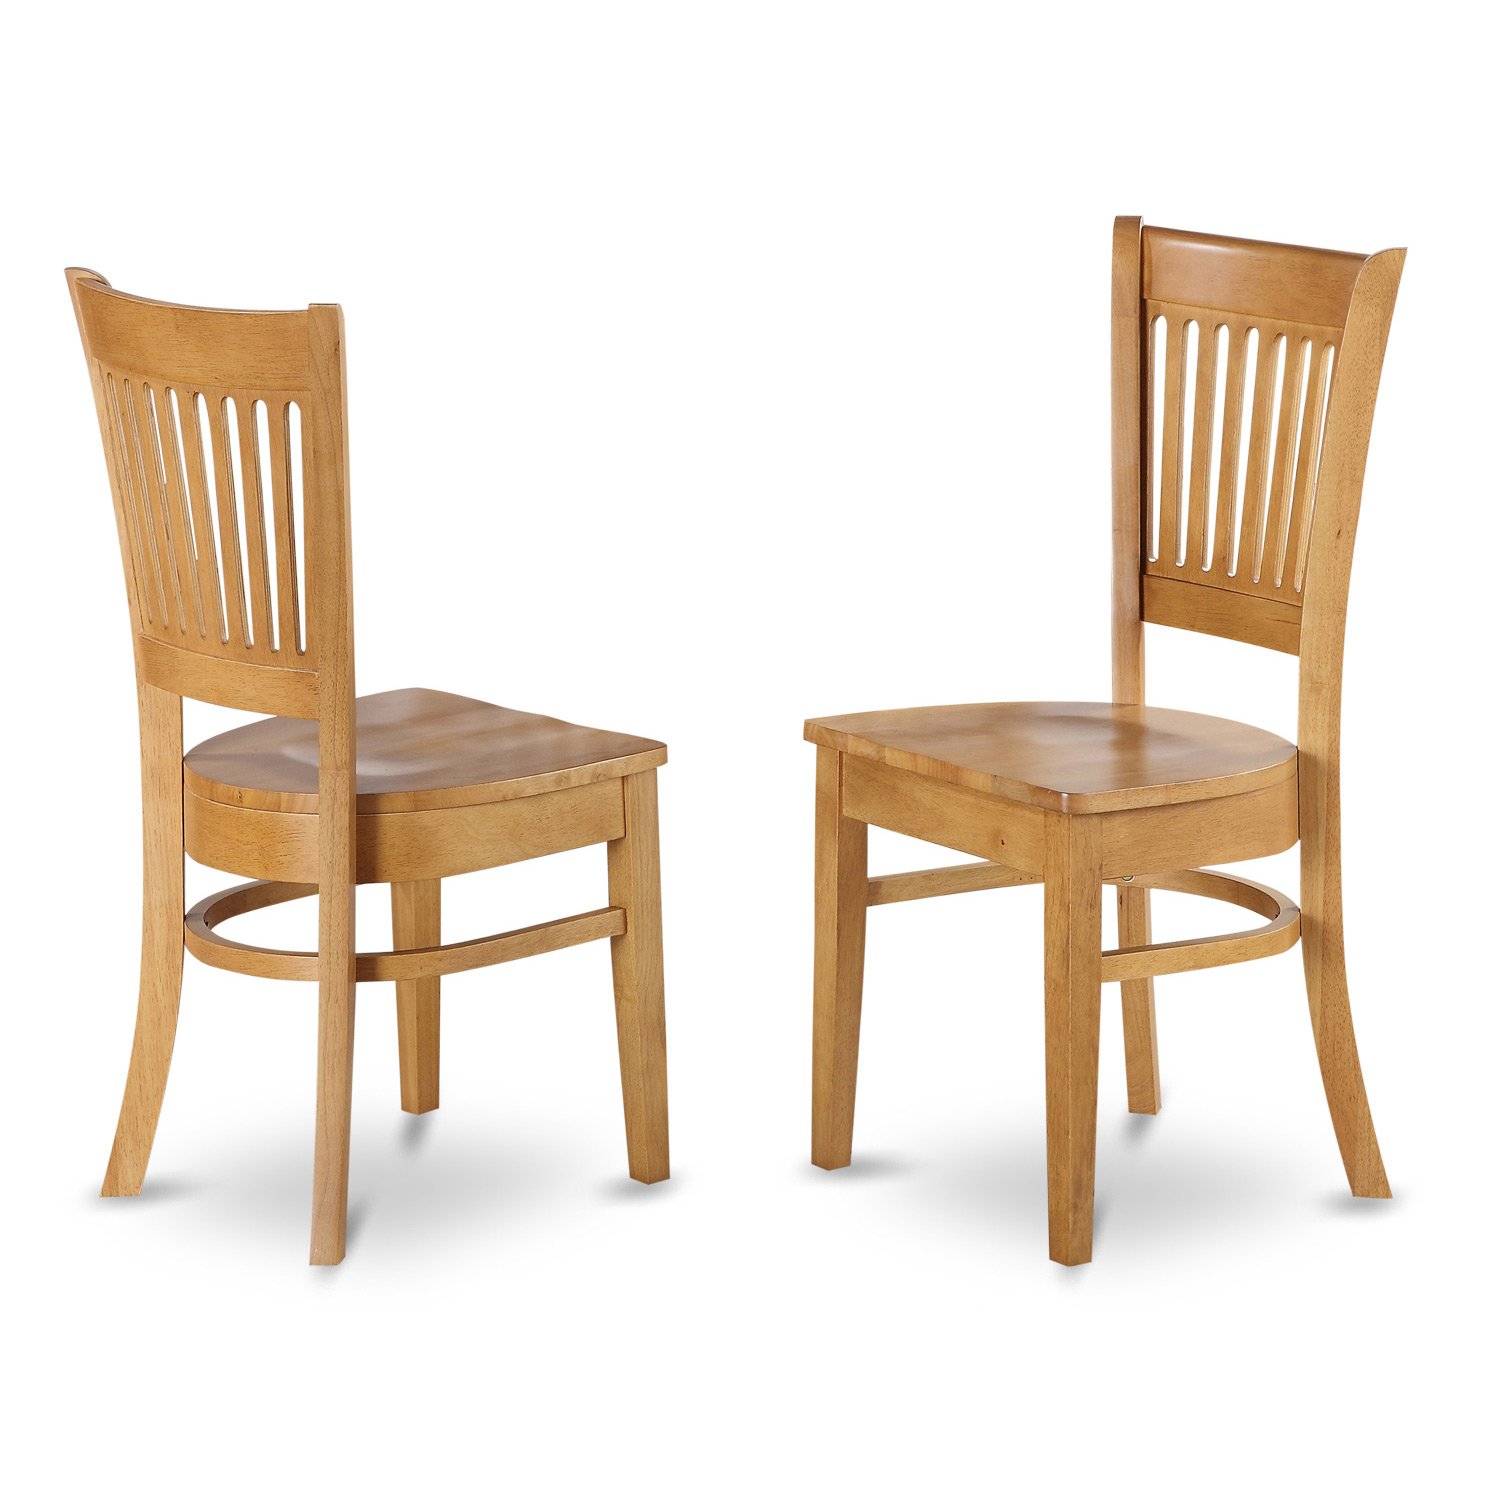 5 Piece Dining Set Includes a Round Dining Room Table with Pedestal and 4 Wood Seat Chairs